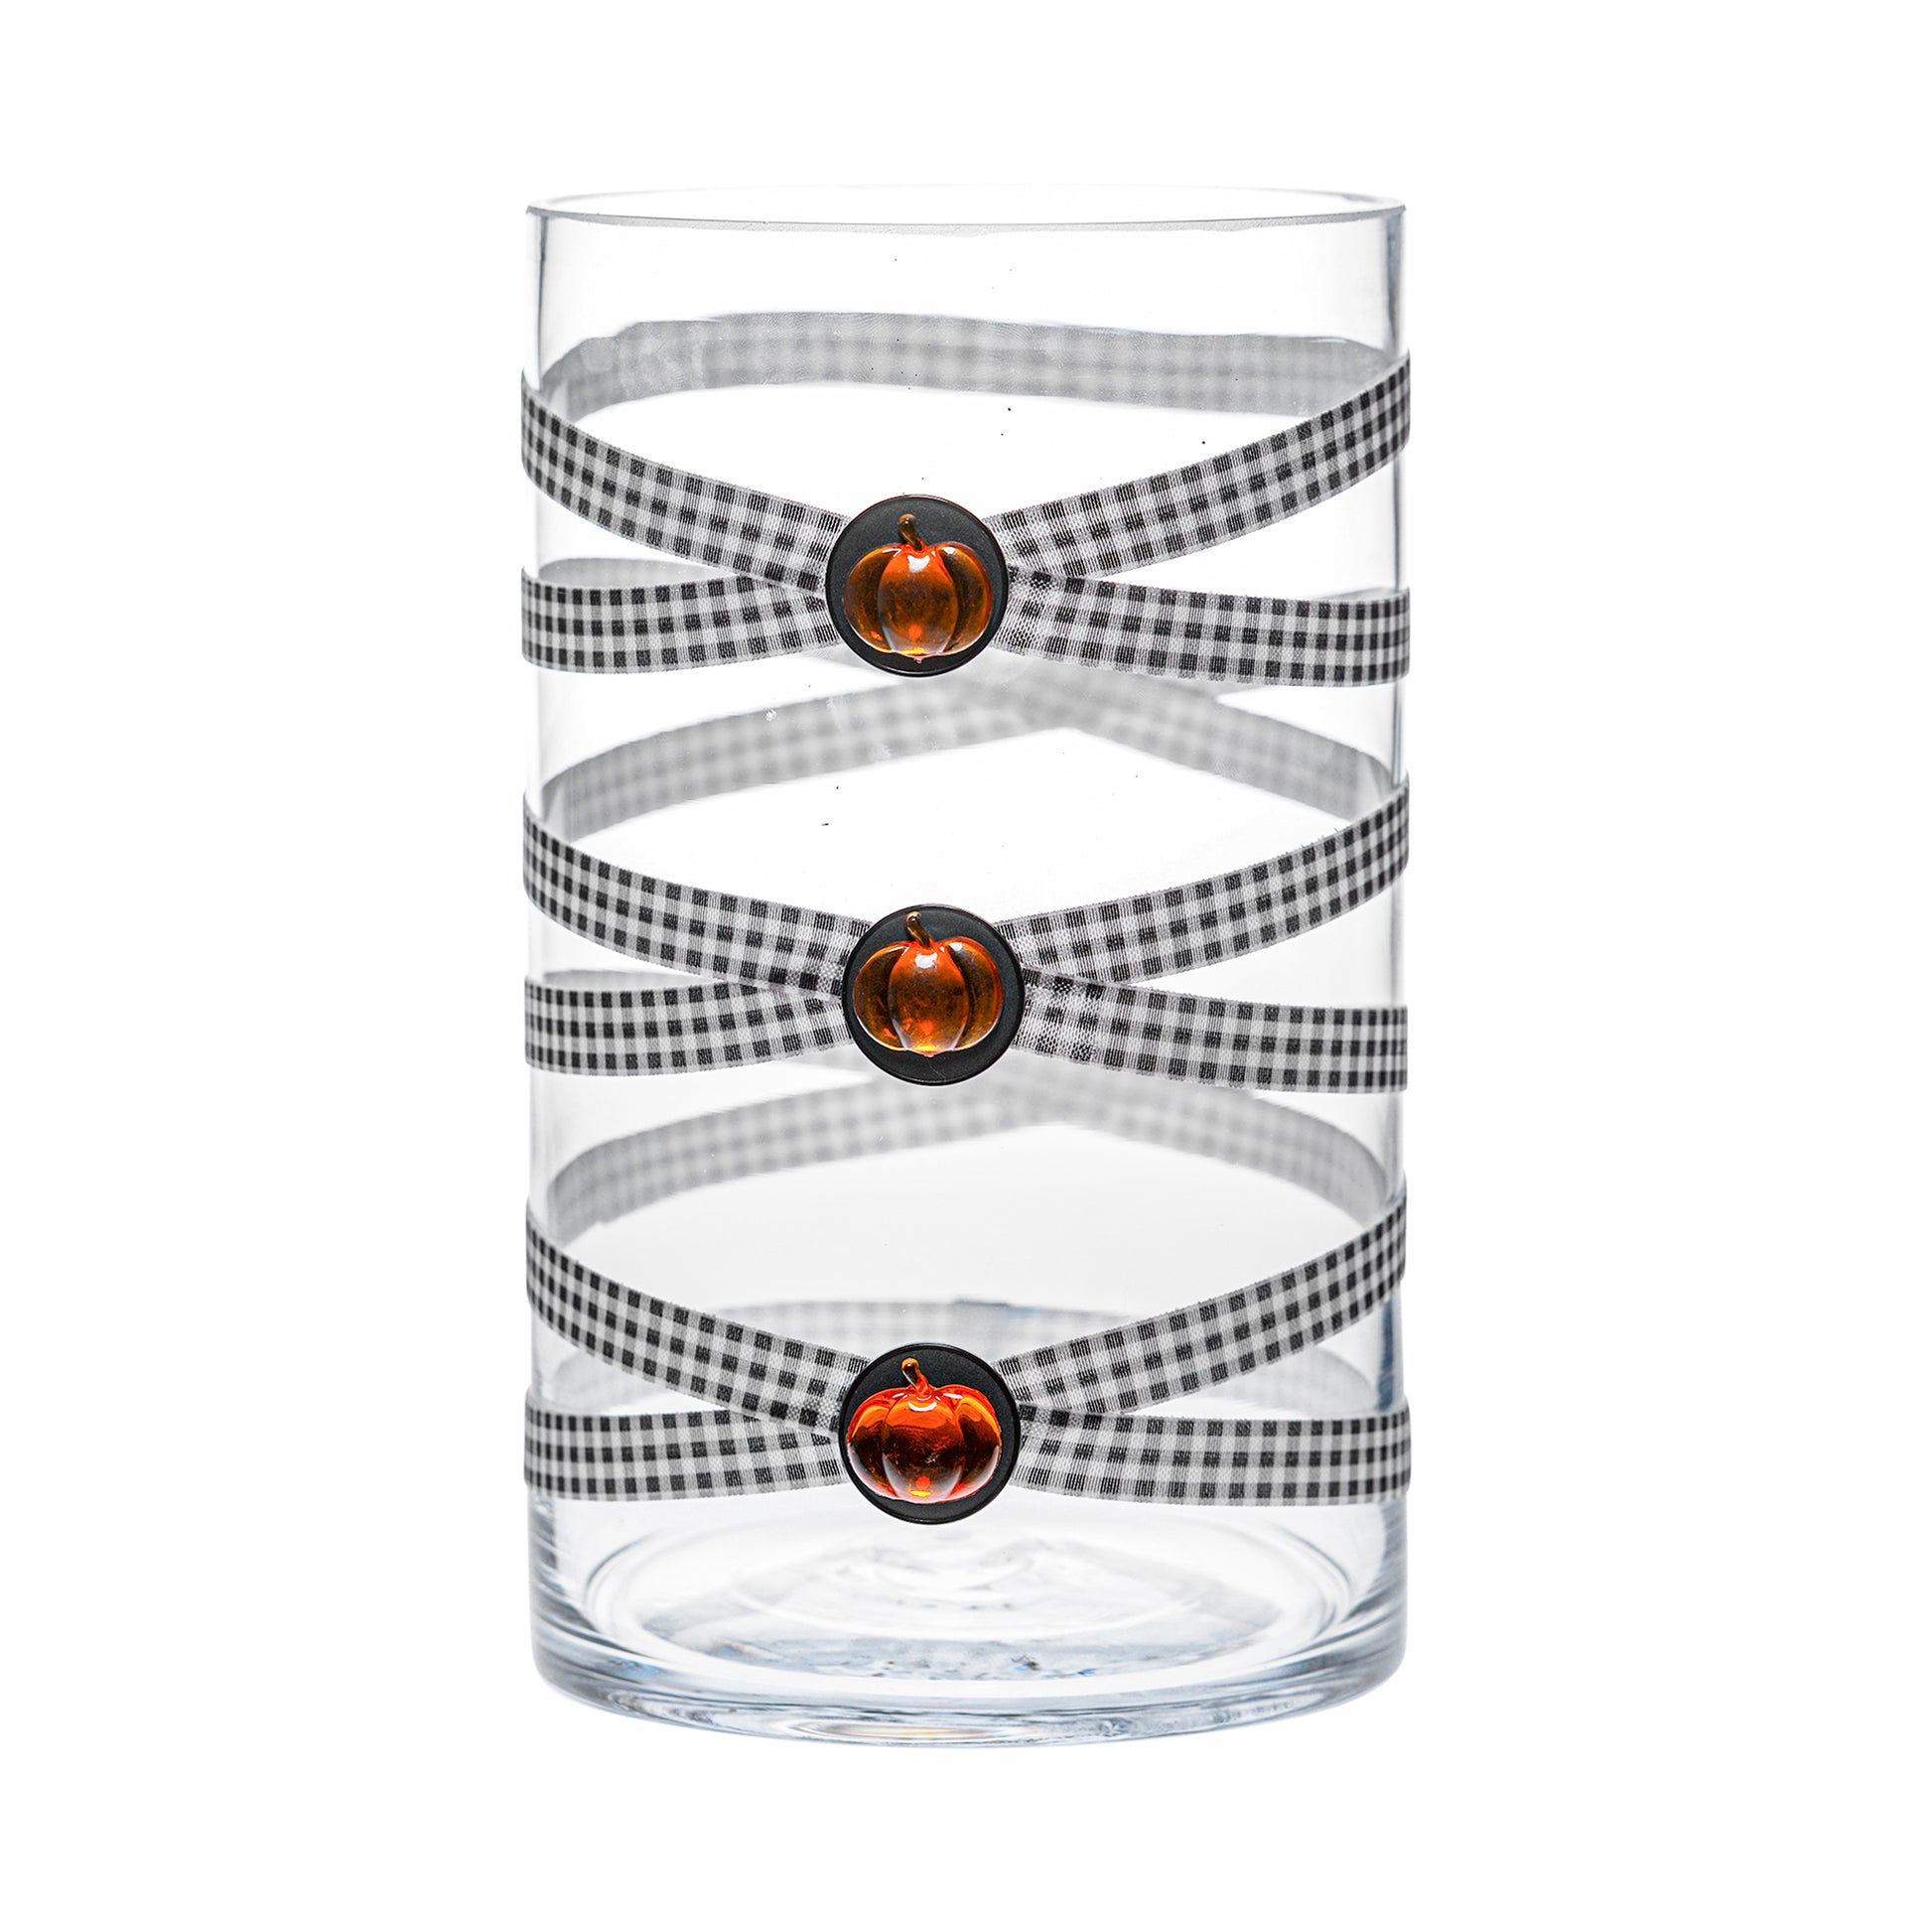 Front of Glass Wrappings 6" x 10" cylinder wrapped in black & white check elastic, decorated with 3 amber pumpkins.